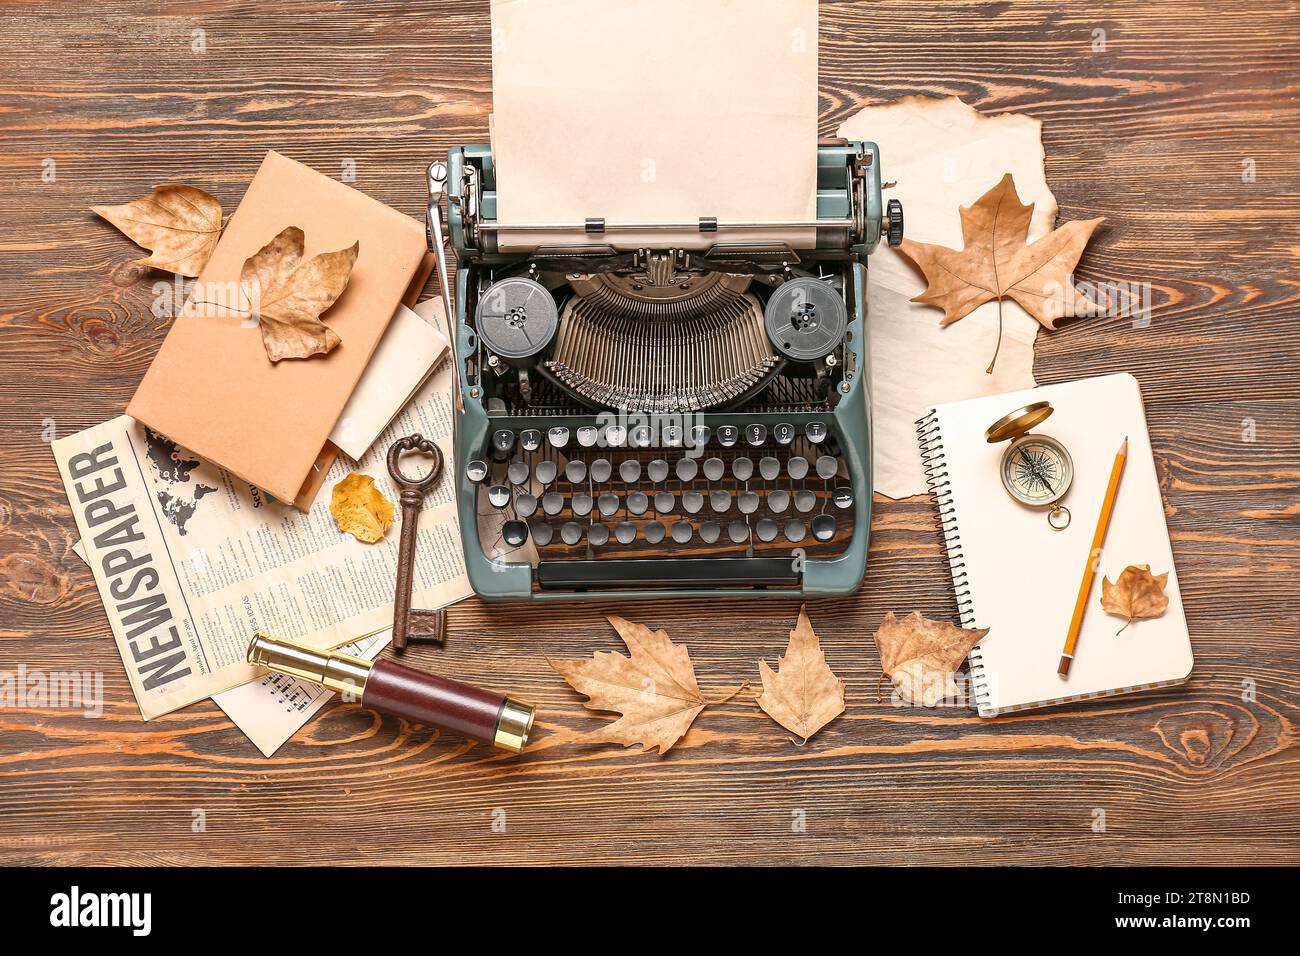 Vintage typewriter, compass, spyglass, book, notebook, newspaper and autumn leaves on wooden background Stock Photo